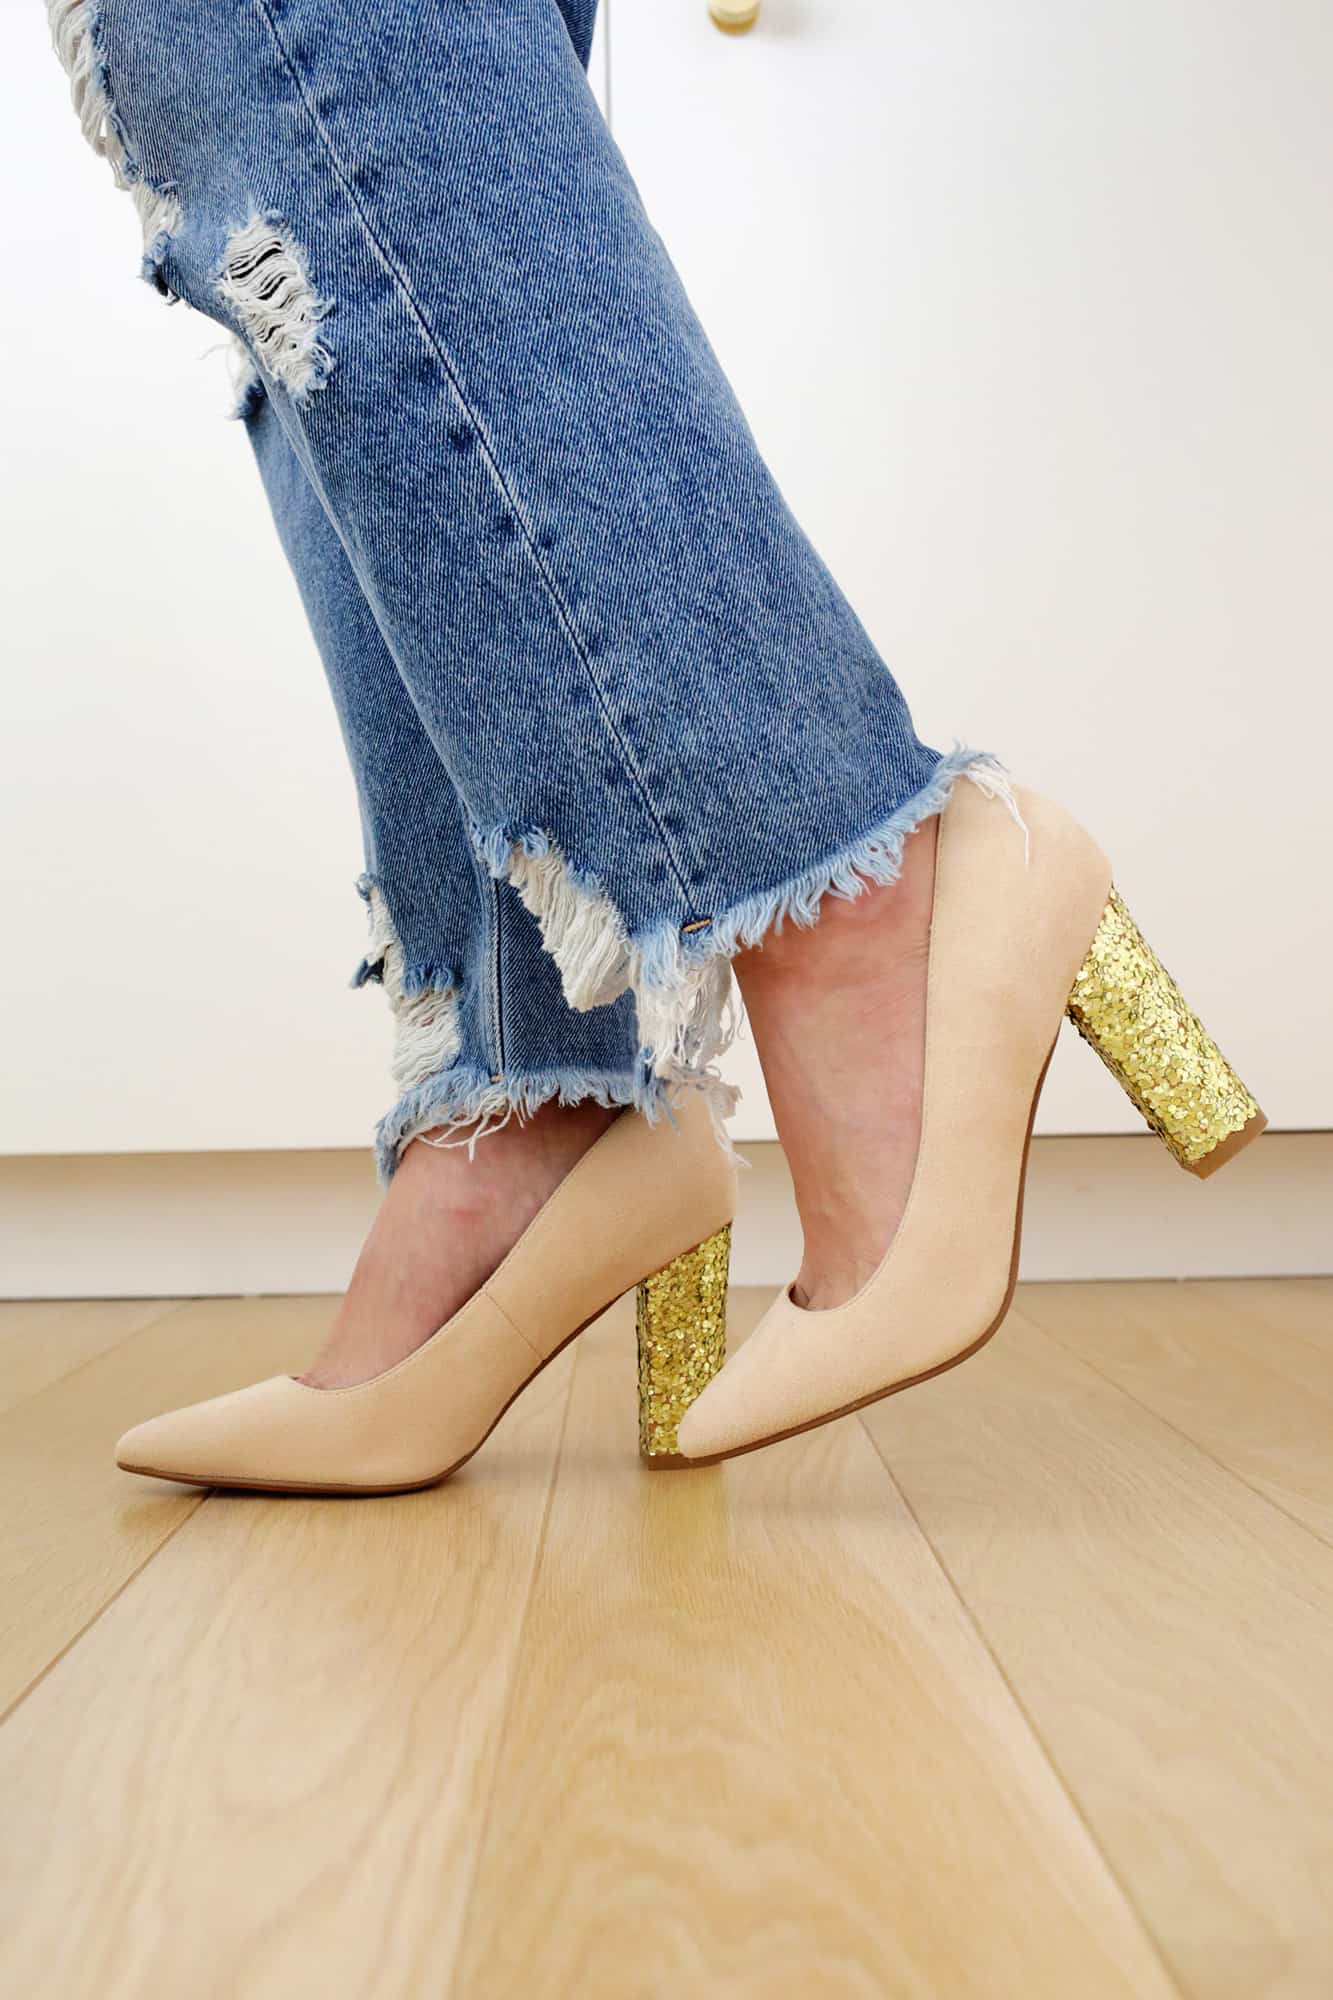 Woman wearing Shoes with gold glittered heels